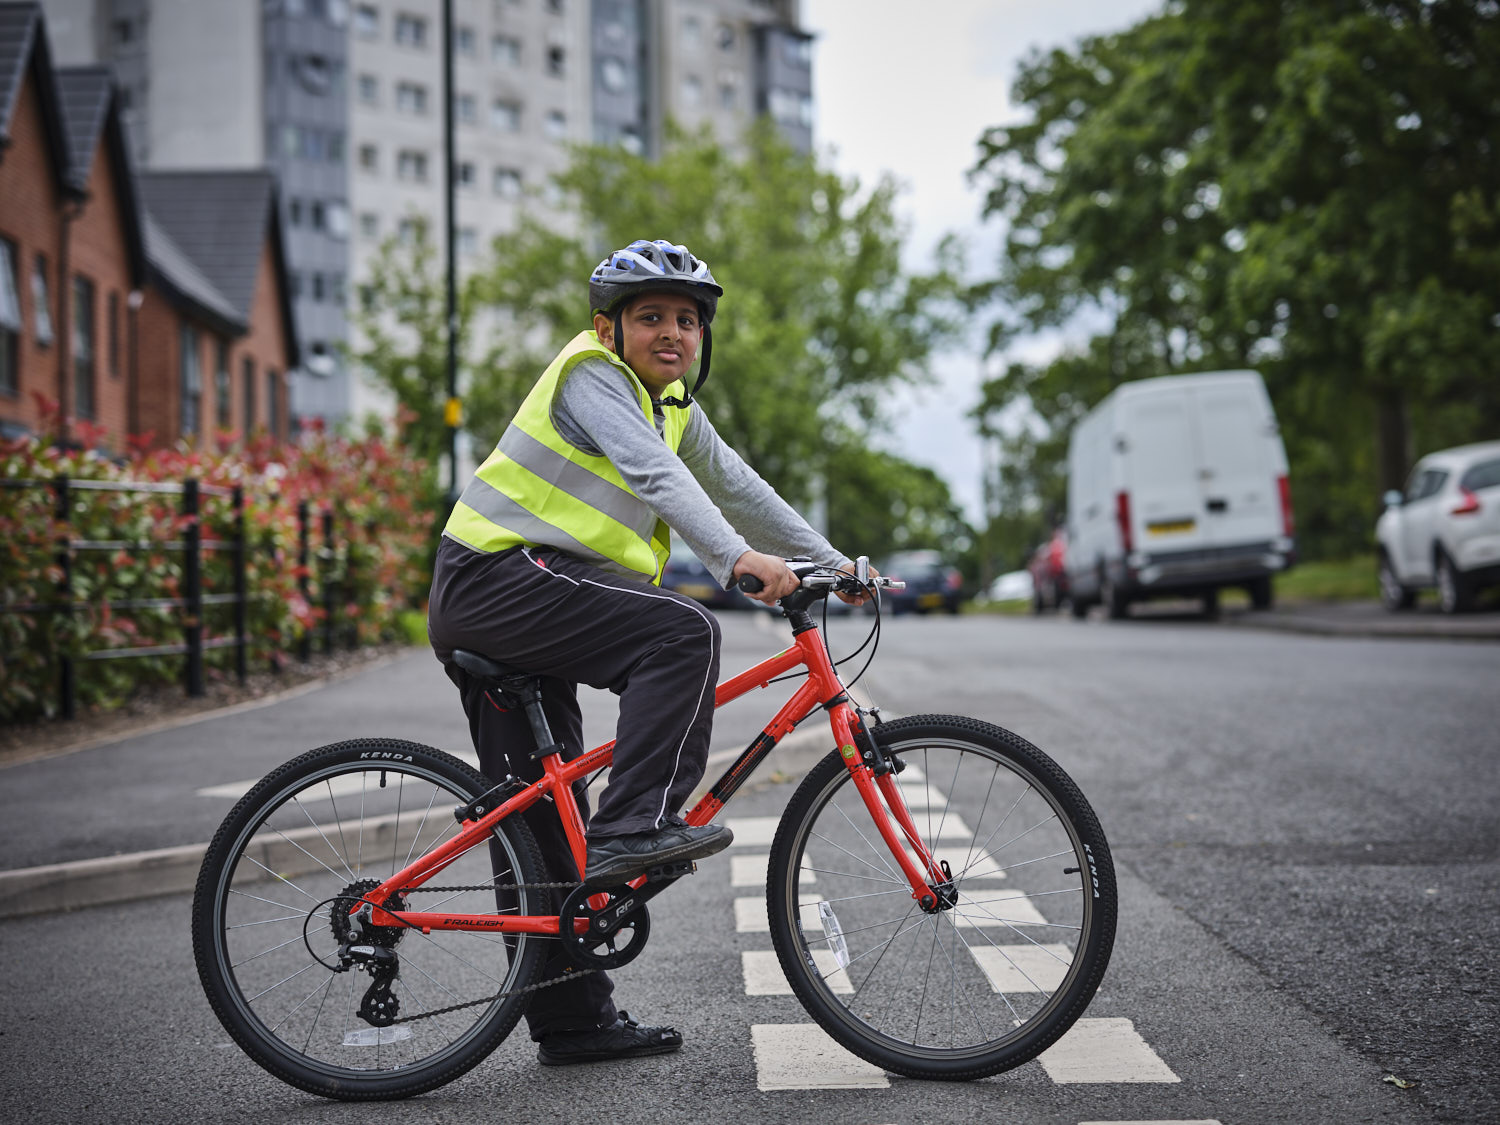 A young Bikeability trainee is sitting on their bicycle in primary position at a junction. They are looking confidently to their right towards the camera.